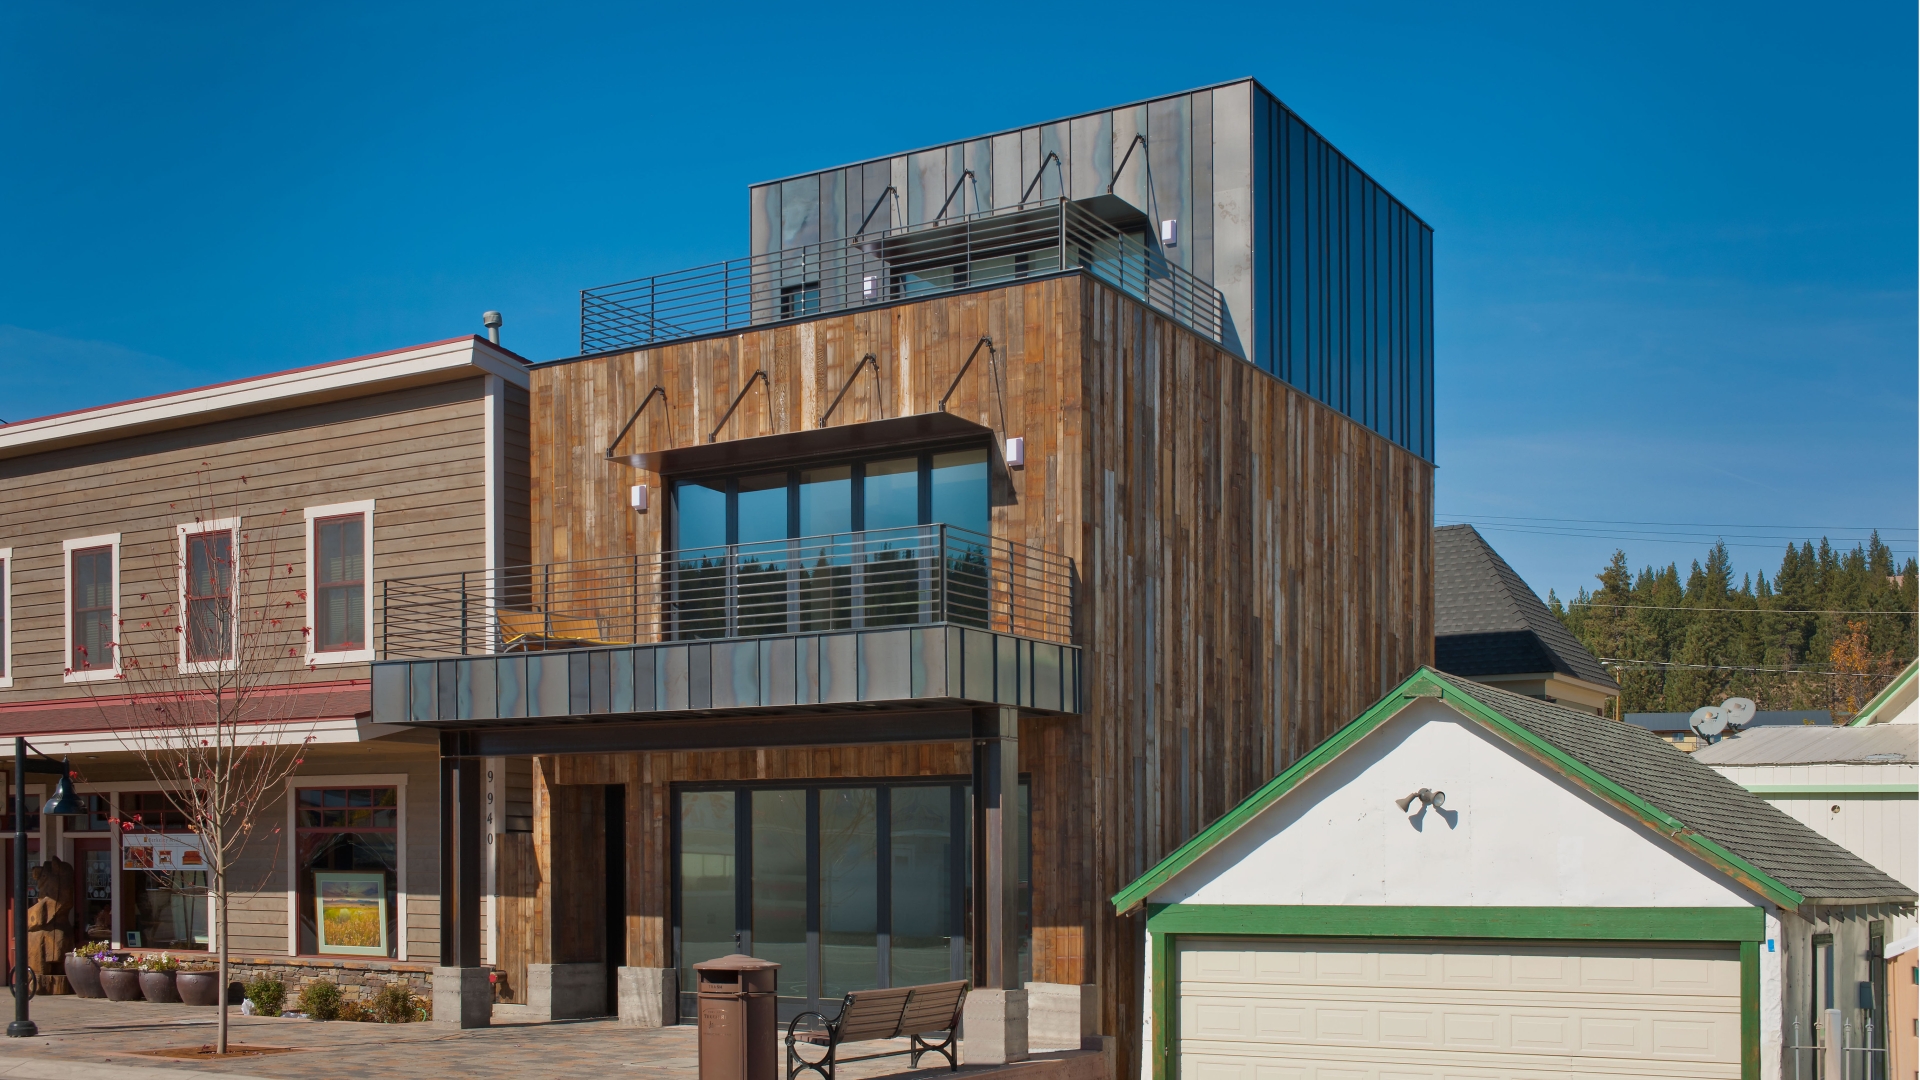 Exterior view of Truckee Prototype Mixed-Use Townhouse in Truckee, California.